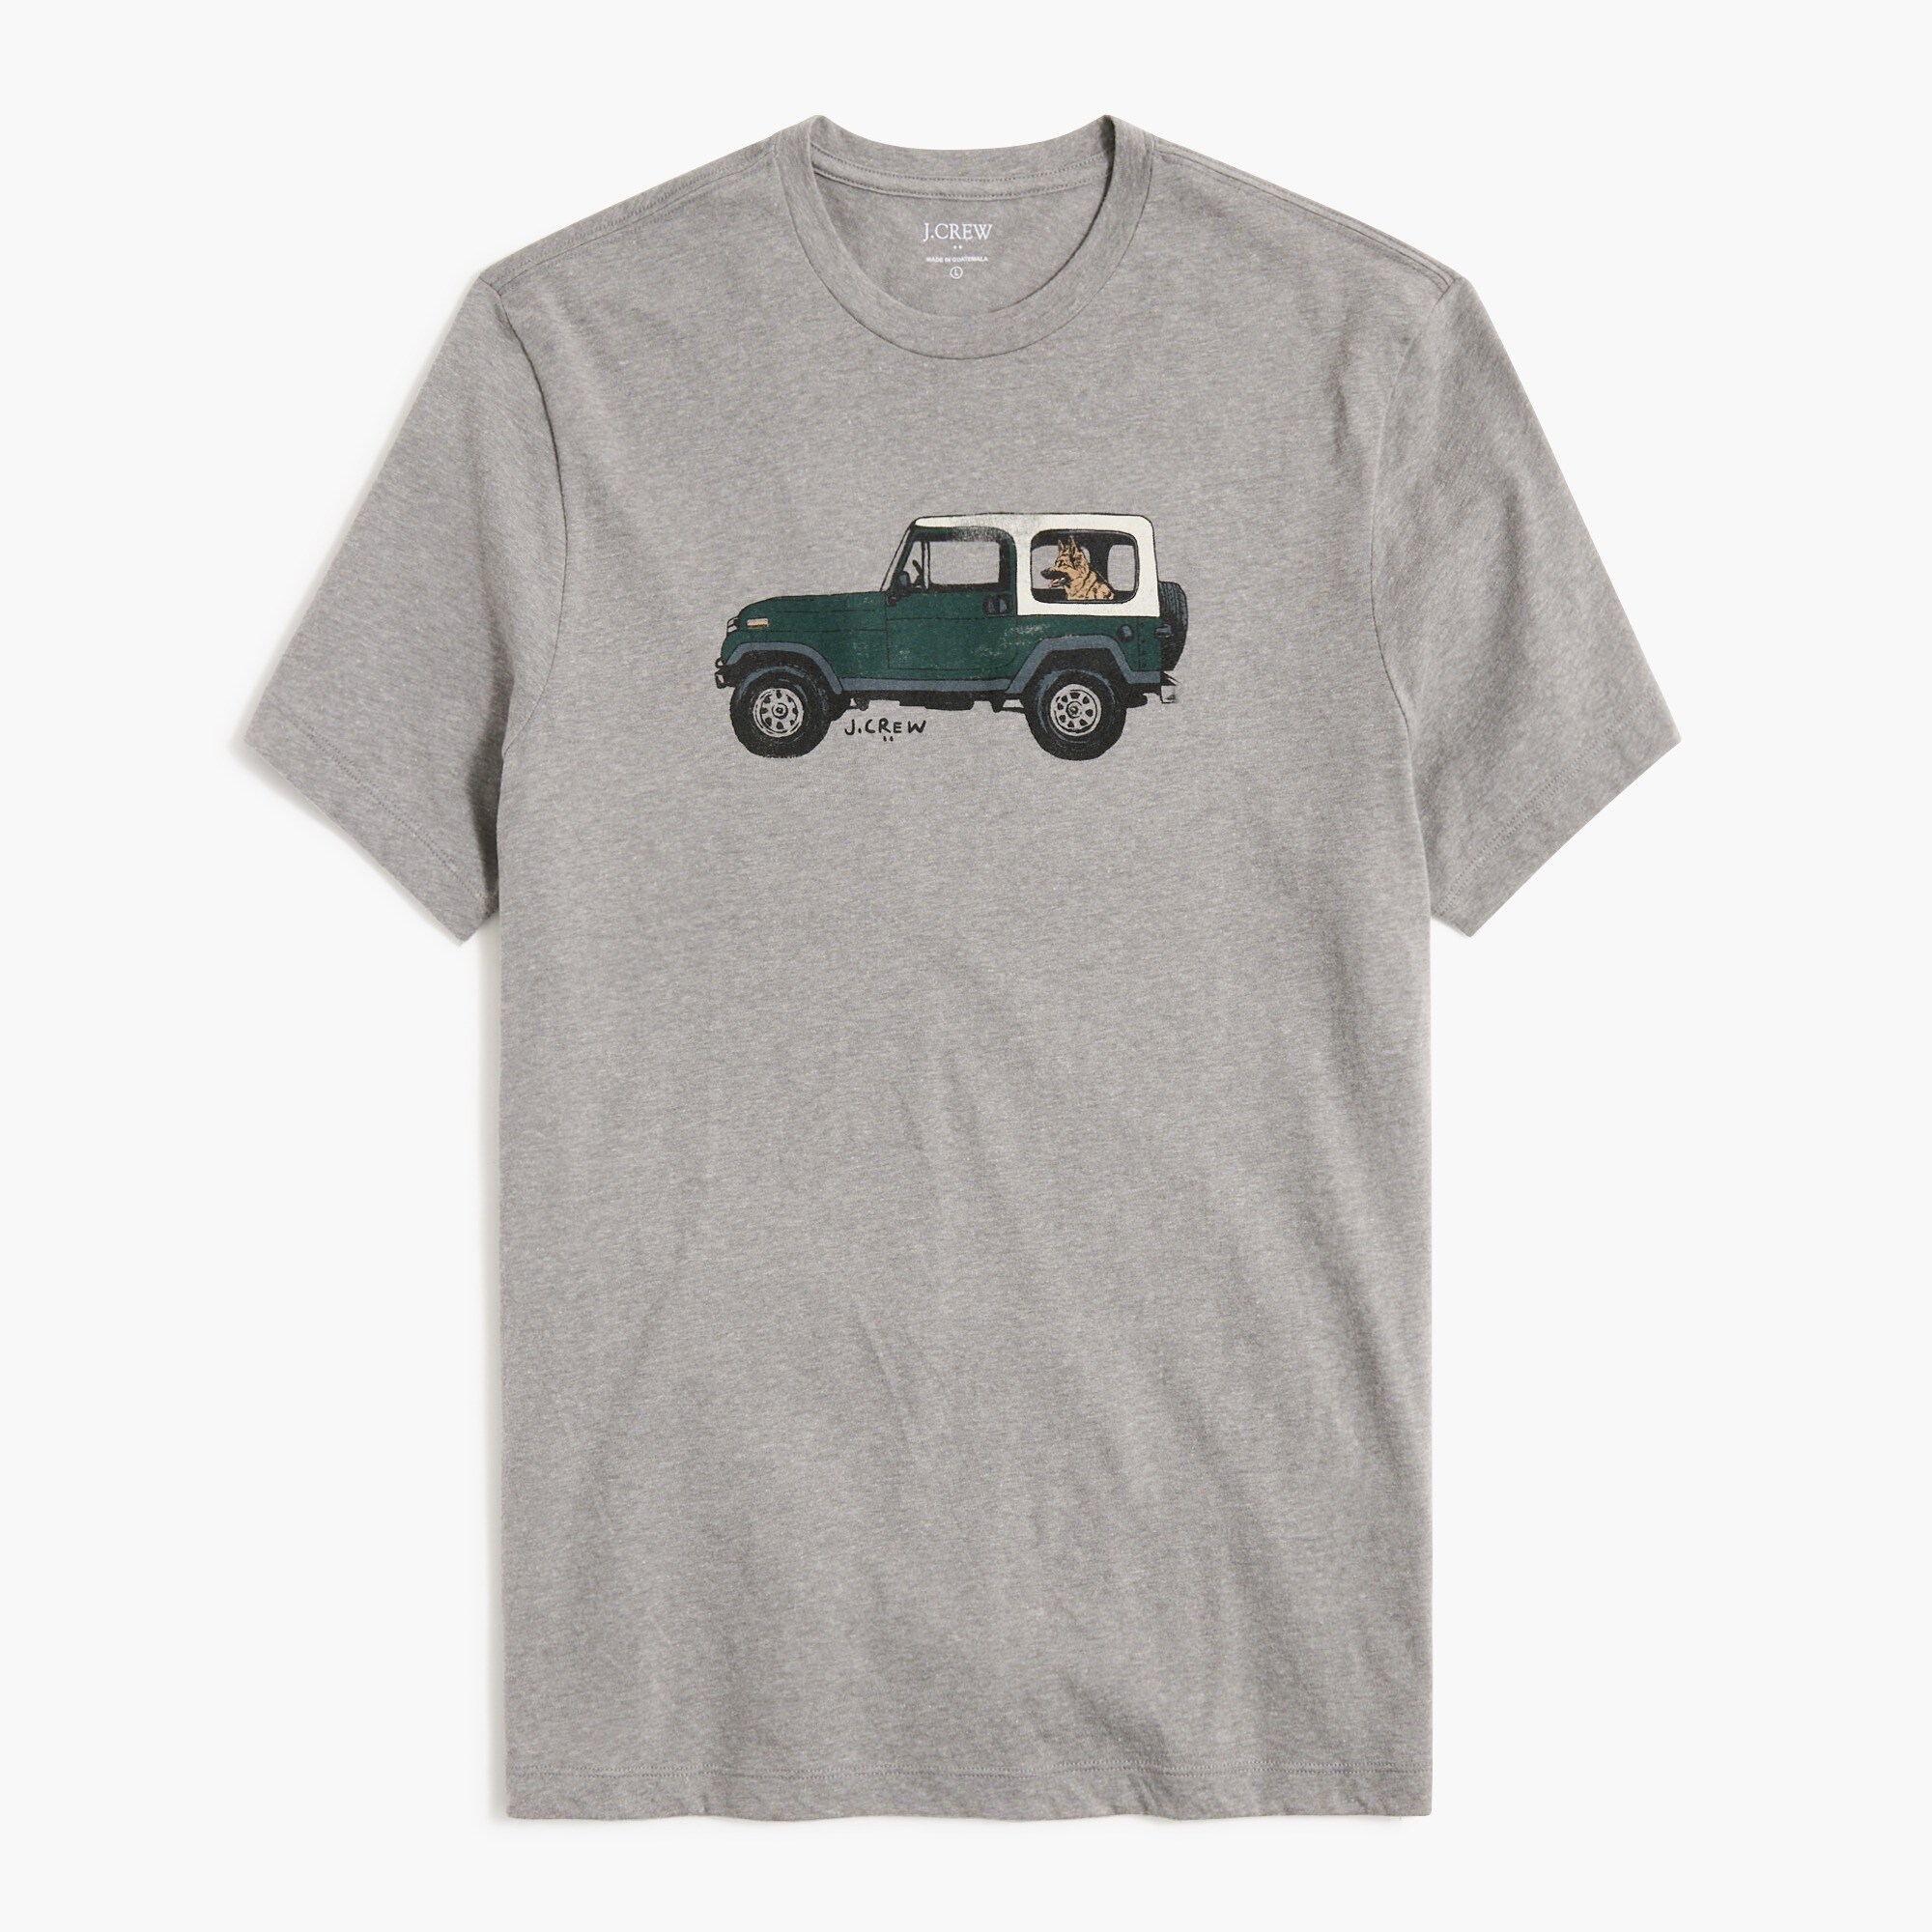  Dog in truck graphic tee